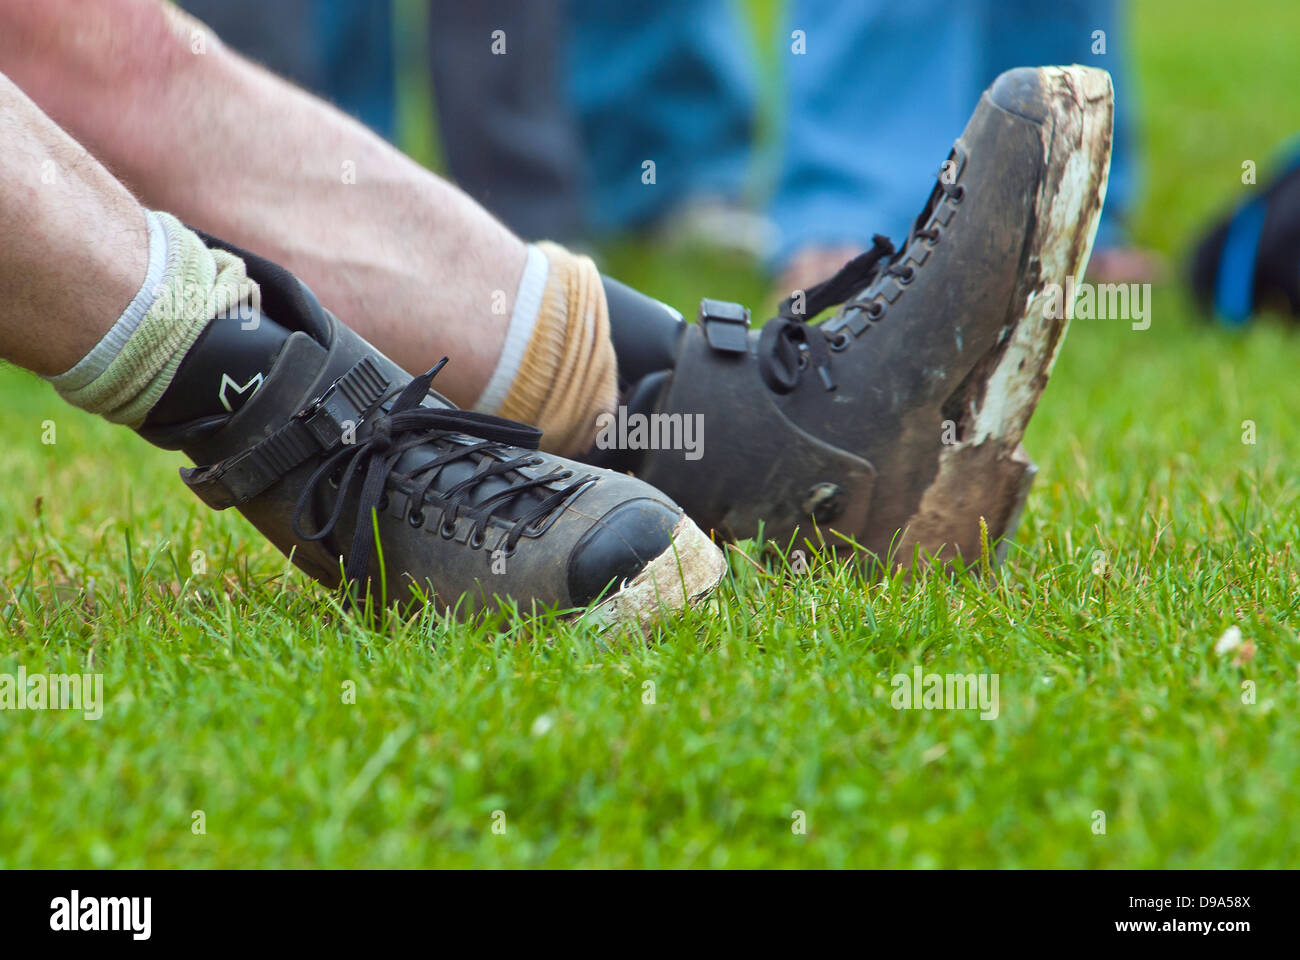 Tug of wars shoes dig into the ground Stock Photo - Alamy